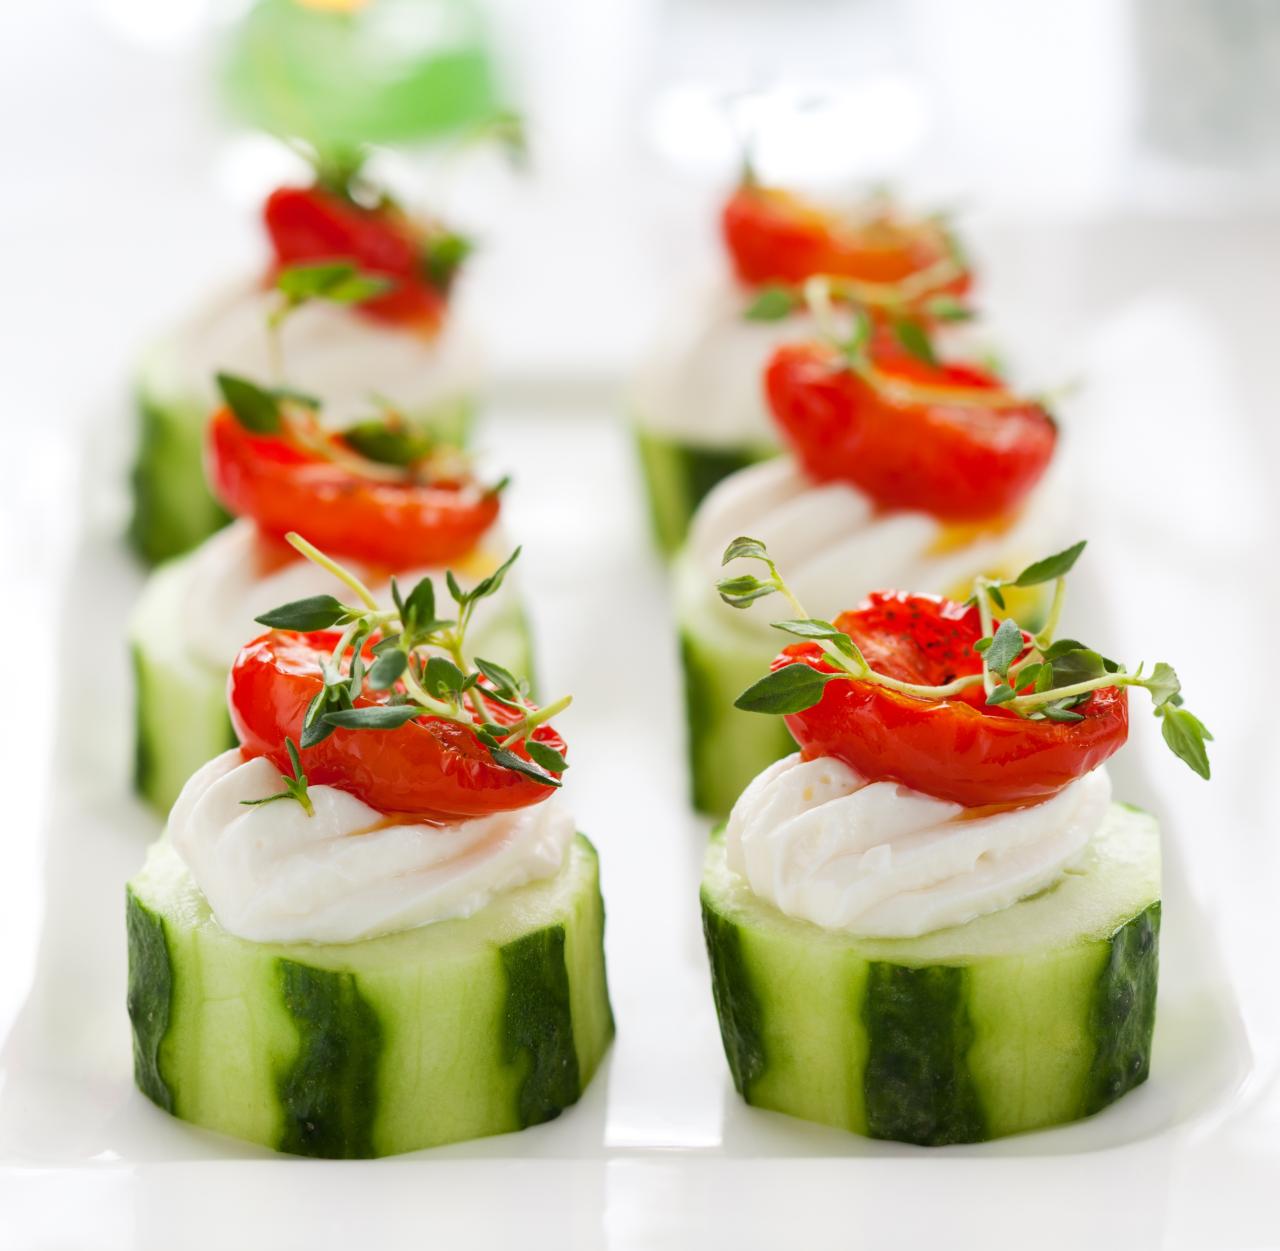 Cucumber Rounds w/ Herb Cream Cheese Filling, Grape Tomatoes & Greens